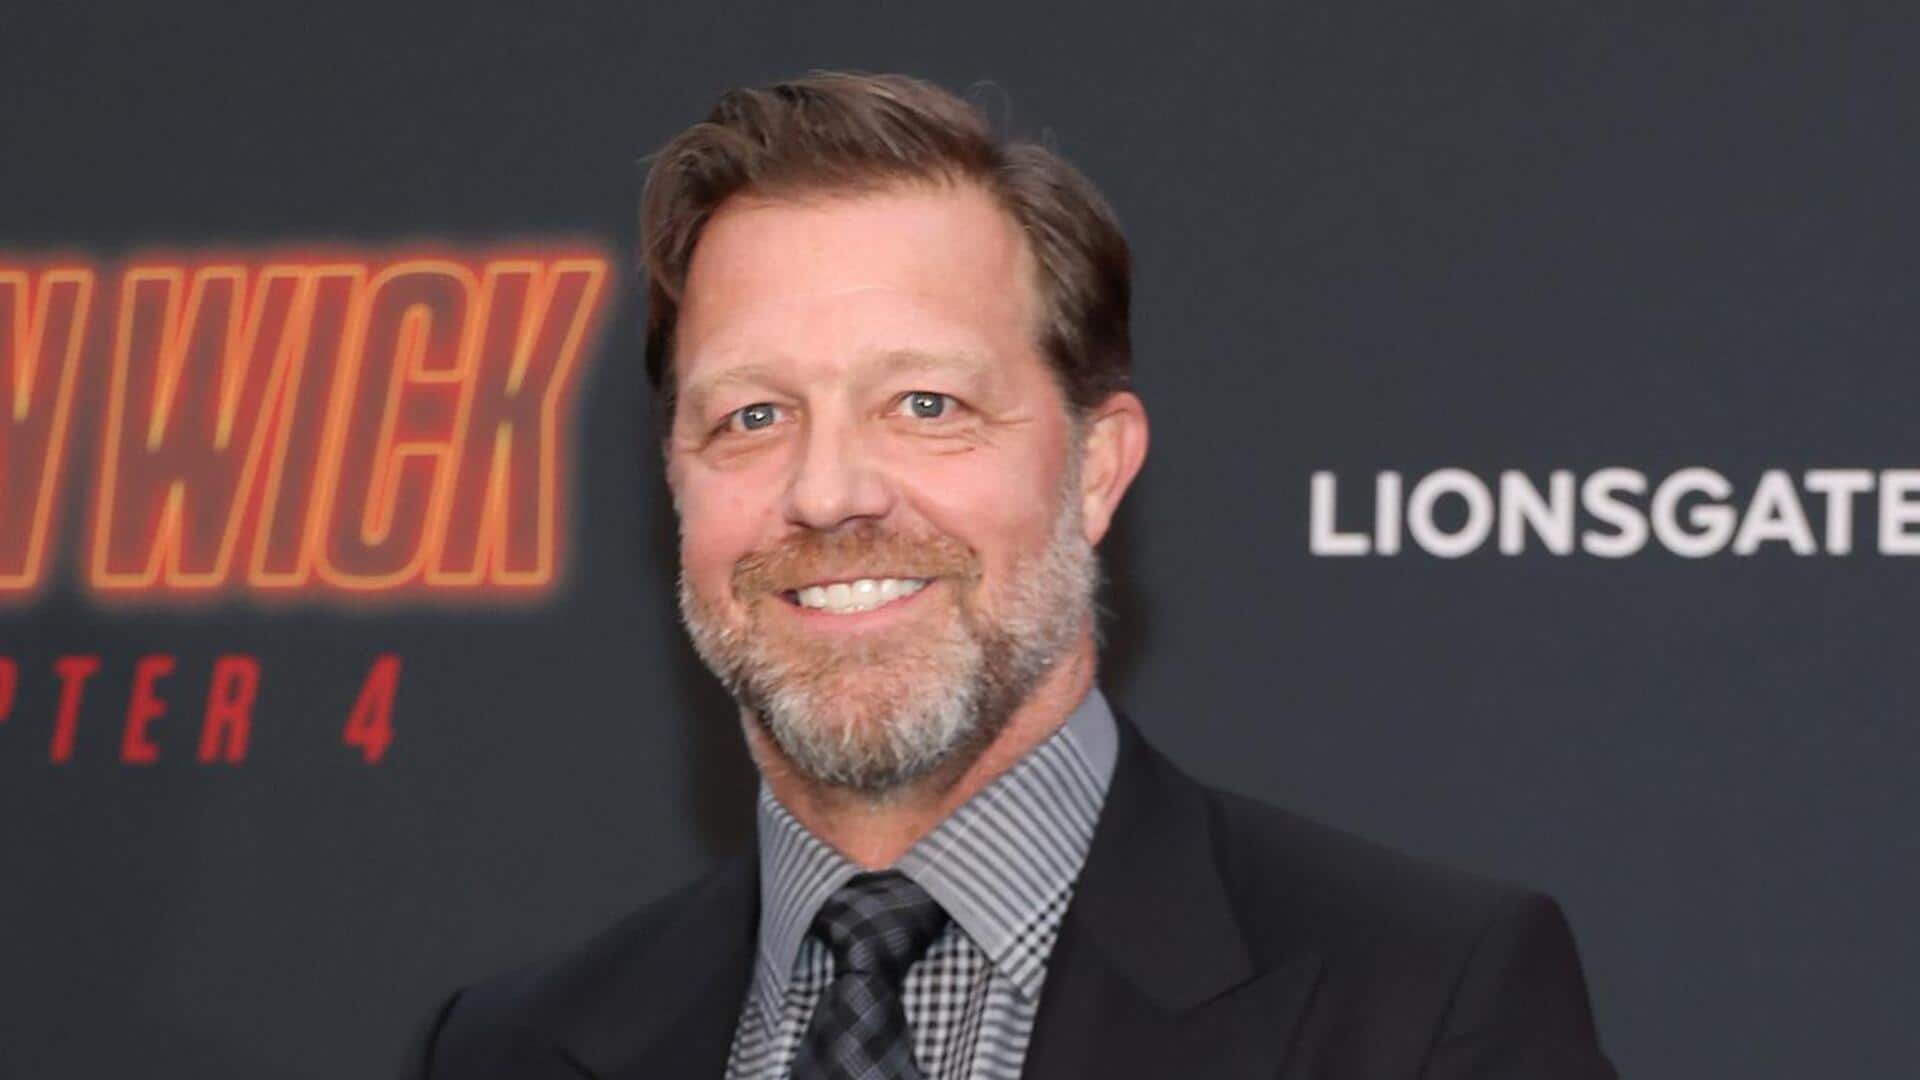 'We've privilege of choice': David Leitch on exiting 'Jurassic World'